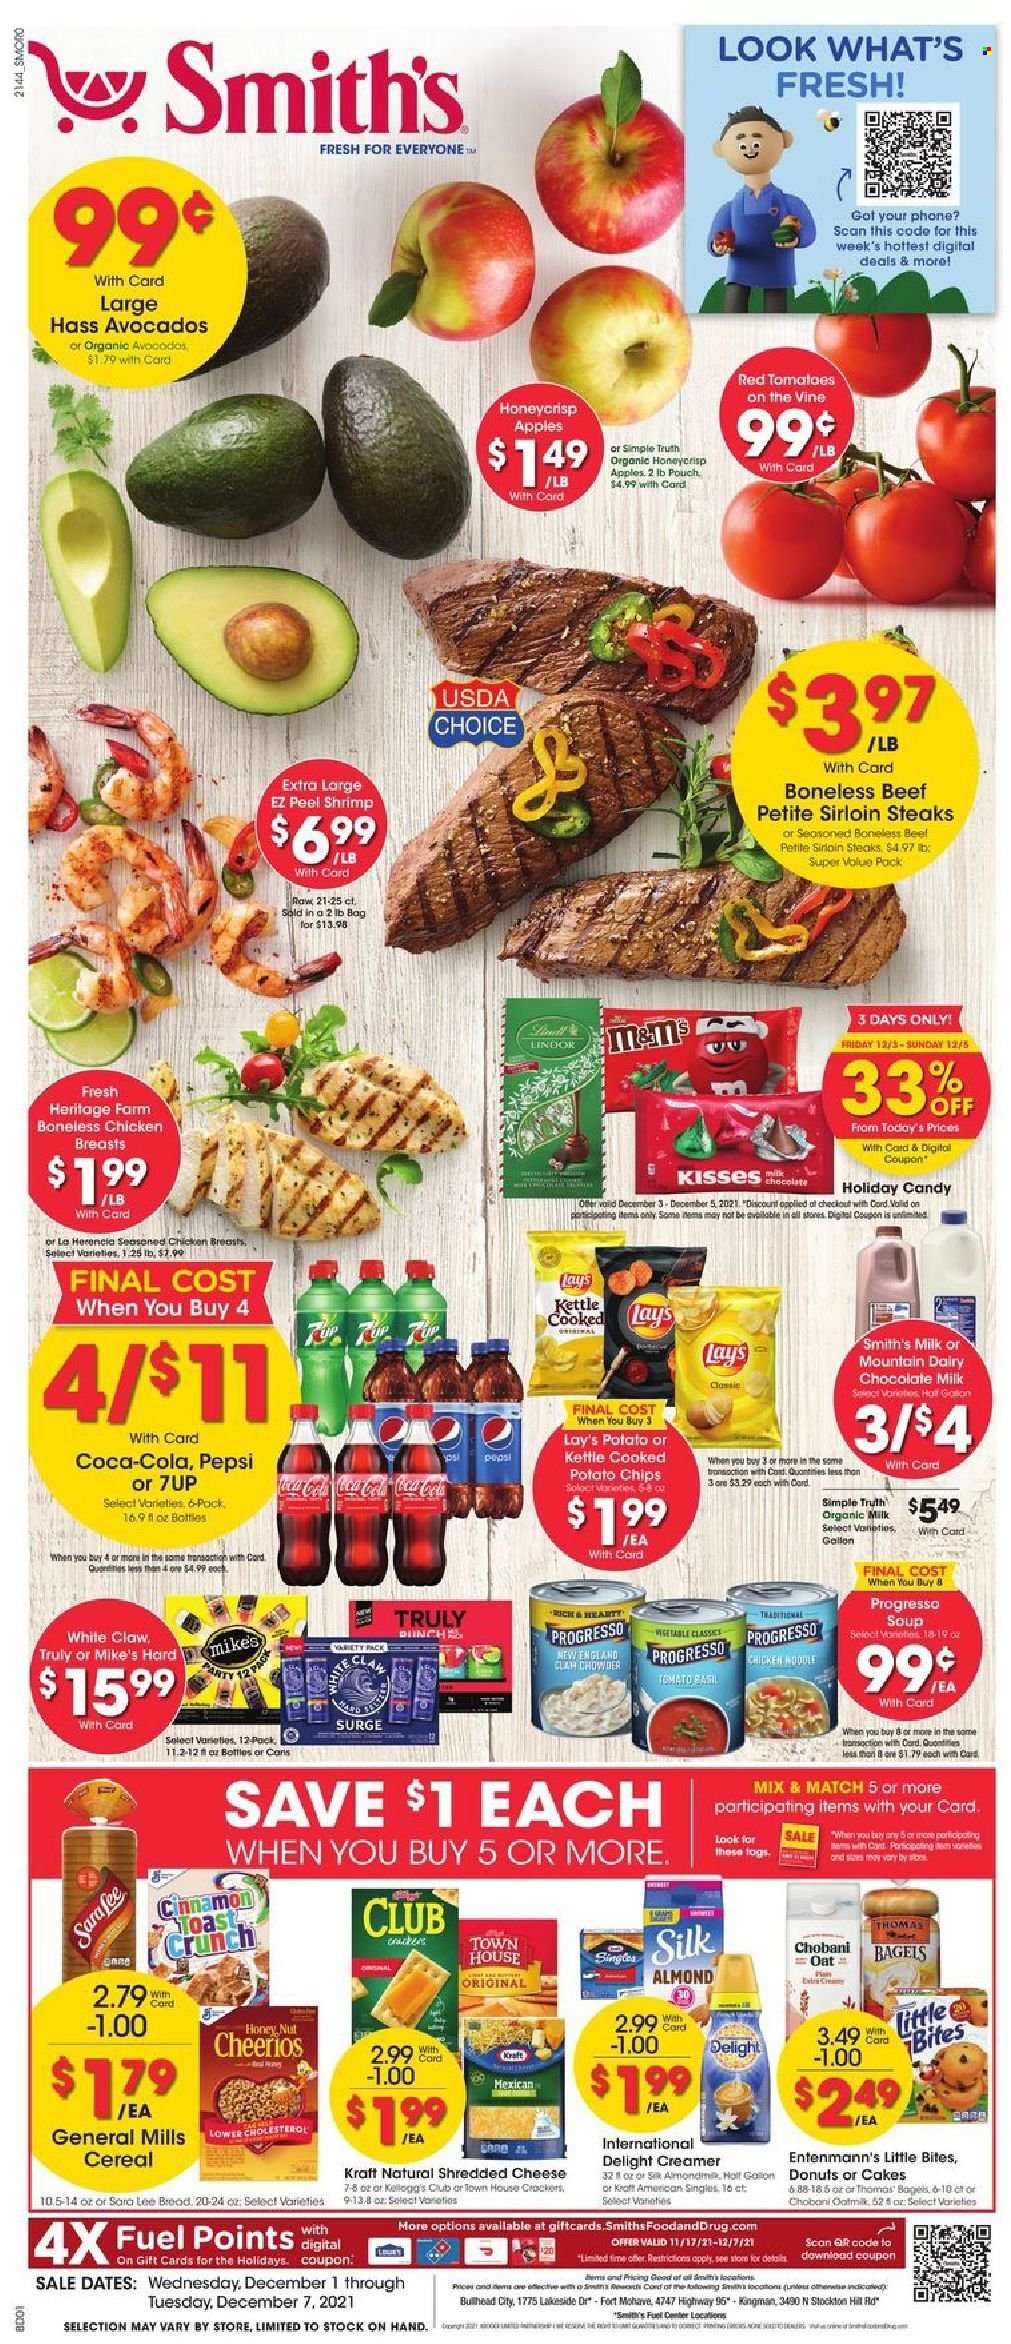 thumbnail - Smith's Flyer - 12/01/2021 - 12/07/2021 - Sales products - bagels, cake, Sara Lee, donut, Entenmann's, tomatoes, apples, avocado, shrimps, noodles, Progresso, Kraft®, shredded cheese, Chobani, organic milk, Silk, creamer, milk chocolate, chocolate, crackers, Little Bites, potato chips, chips, Lay’s, Smith's, oats, cereals, Cheerios, esponja, cinnamon, Coca-Cola, Pepsi, 7UP, Moët & Chandon, White Claw, TRULY, steak, sirloin steak. Page 1.